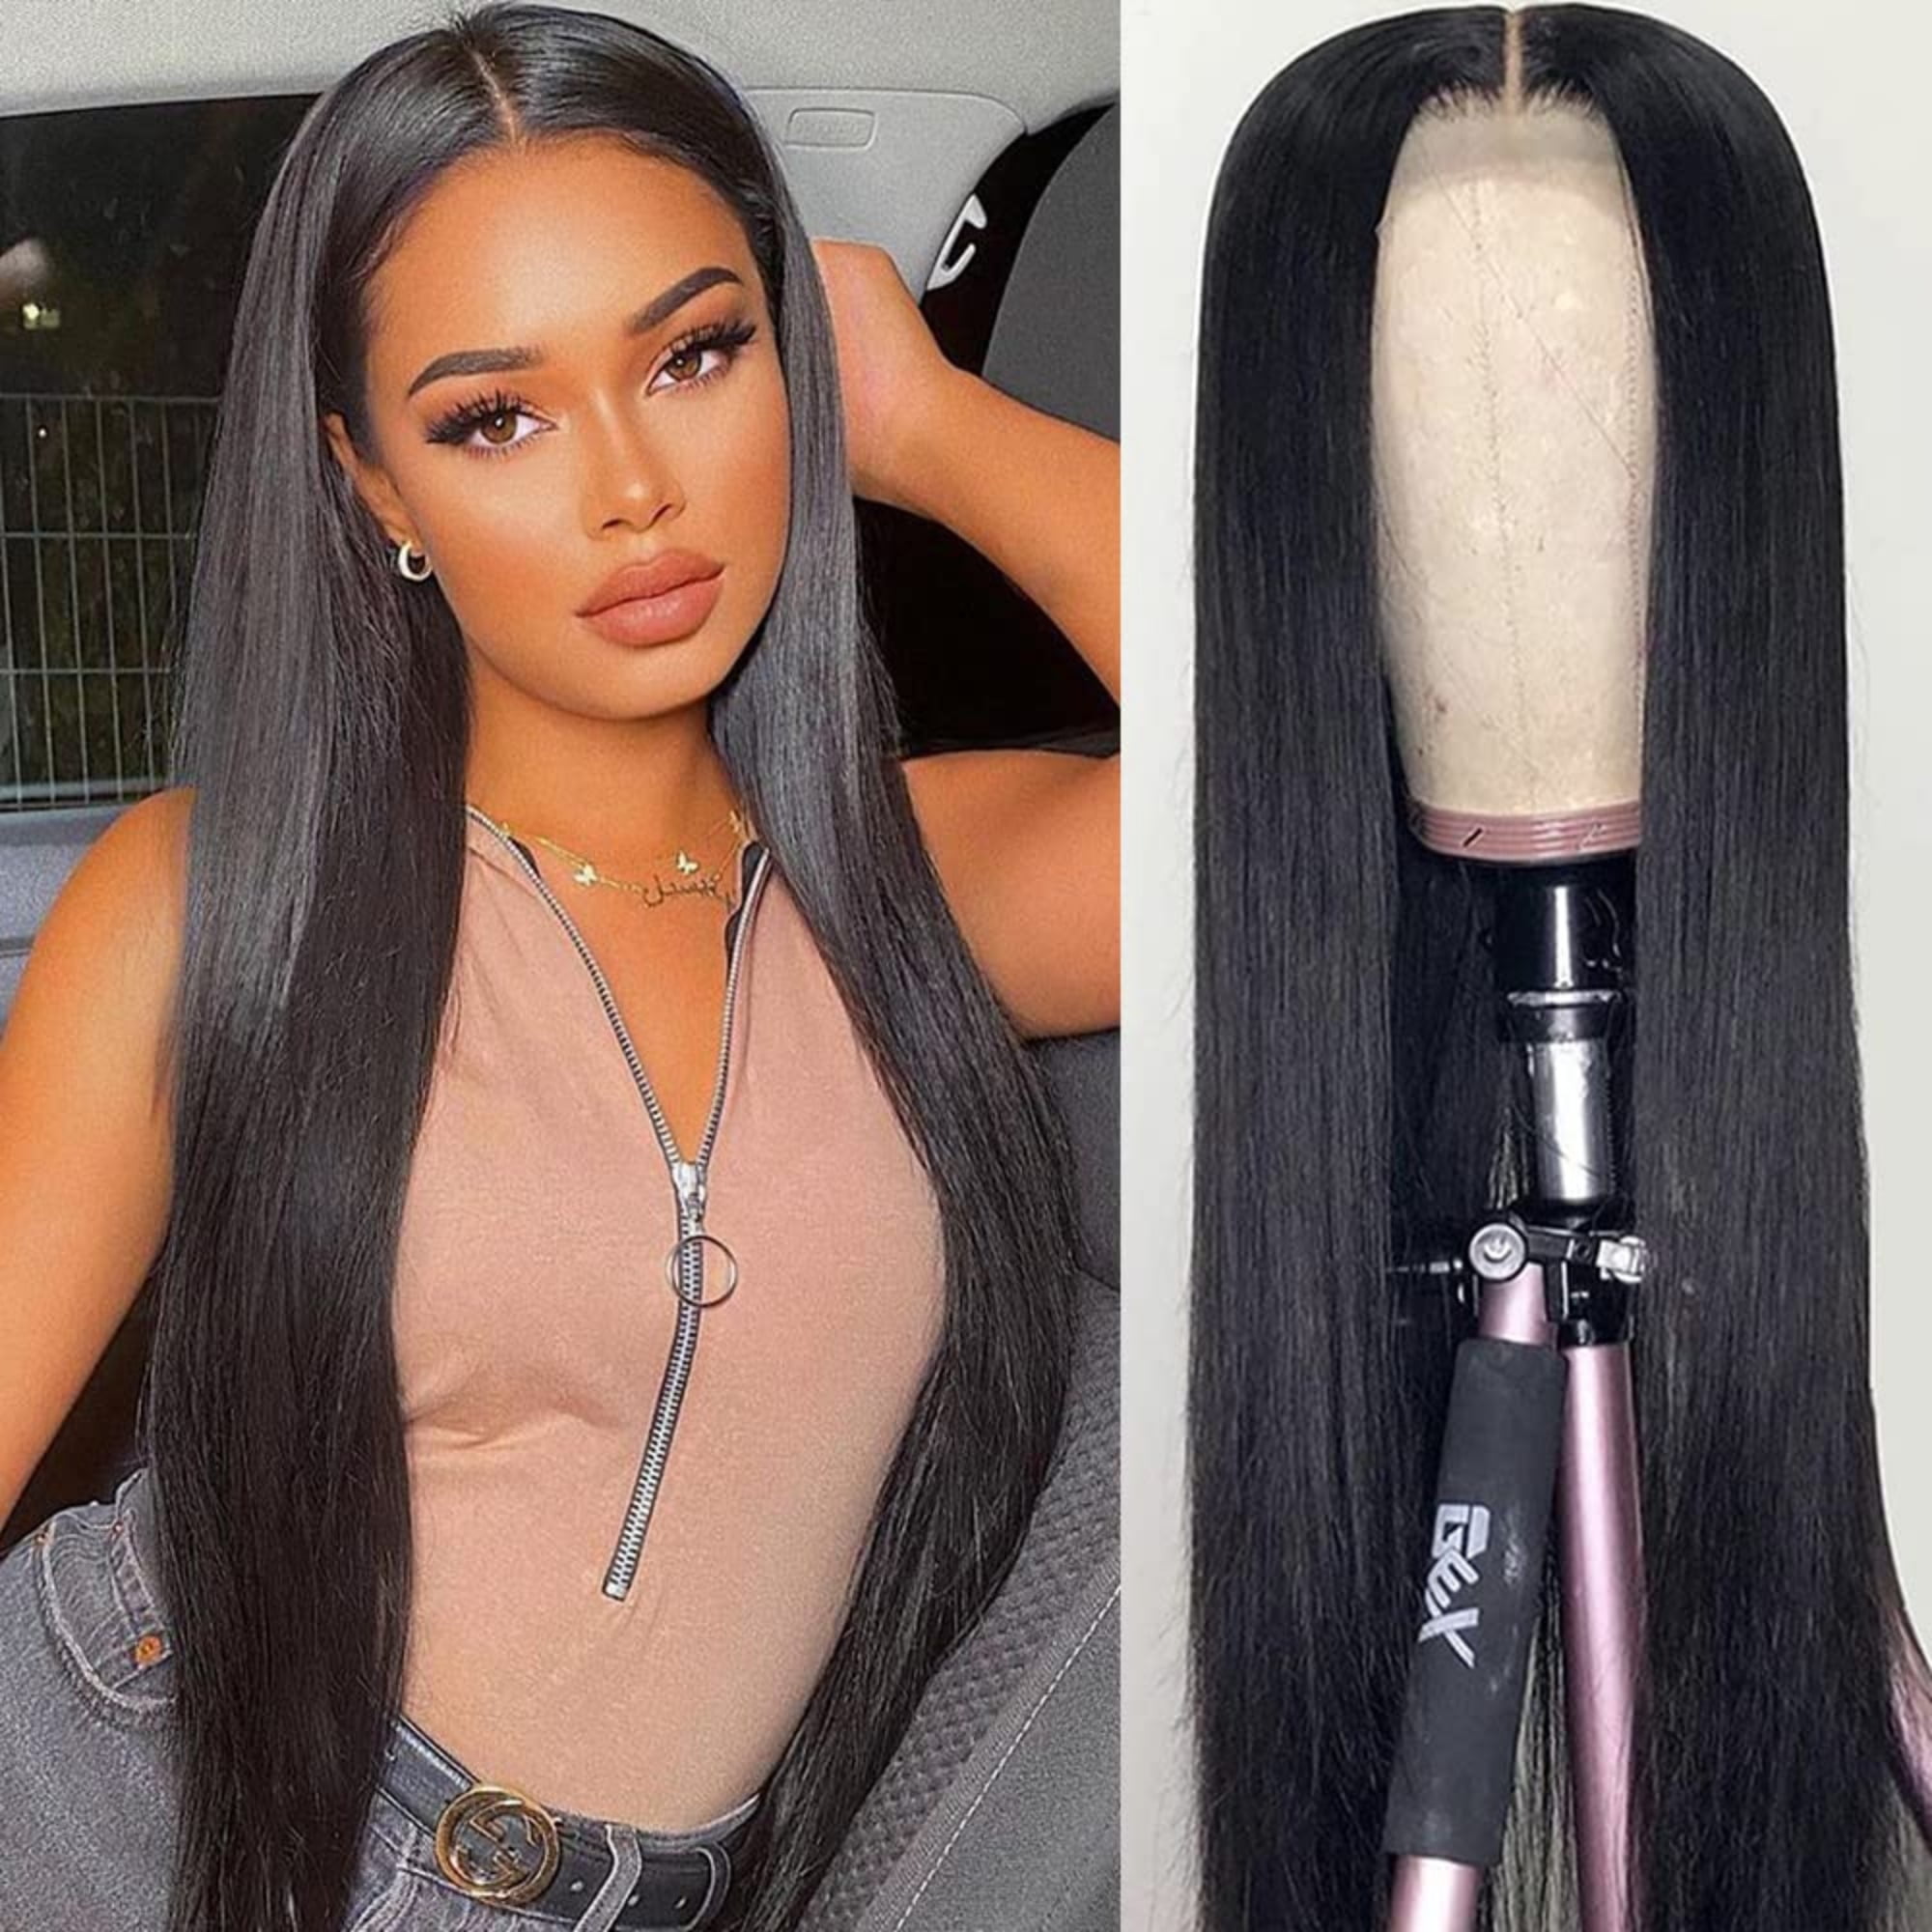 Beauhair 4x4 Lace Closure wigs with baby hair Lace Front Wig Human Hair  Natural Black Color For Black Women Straight 20inch (Wig Cap Type:4”x4” Lace  Closure Wig) 